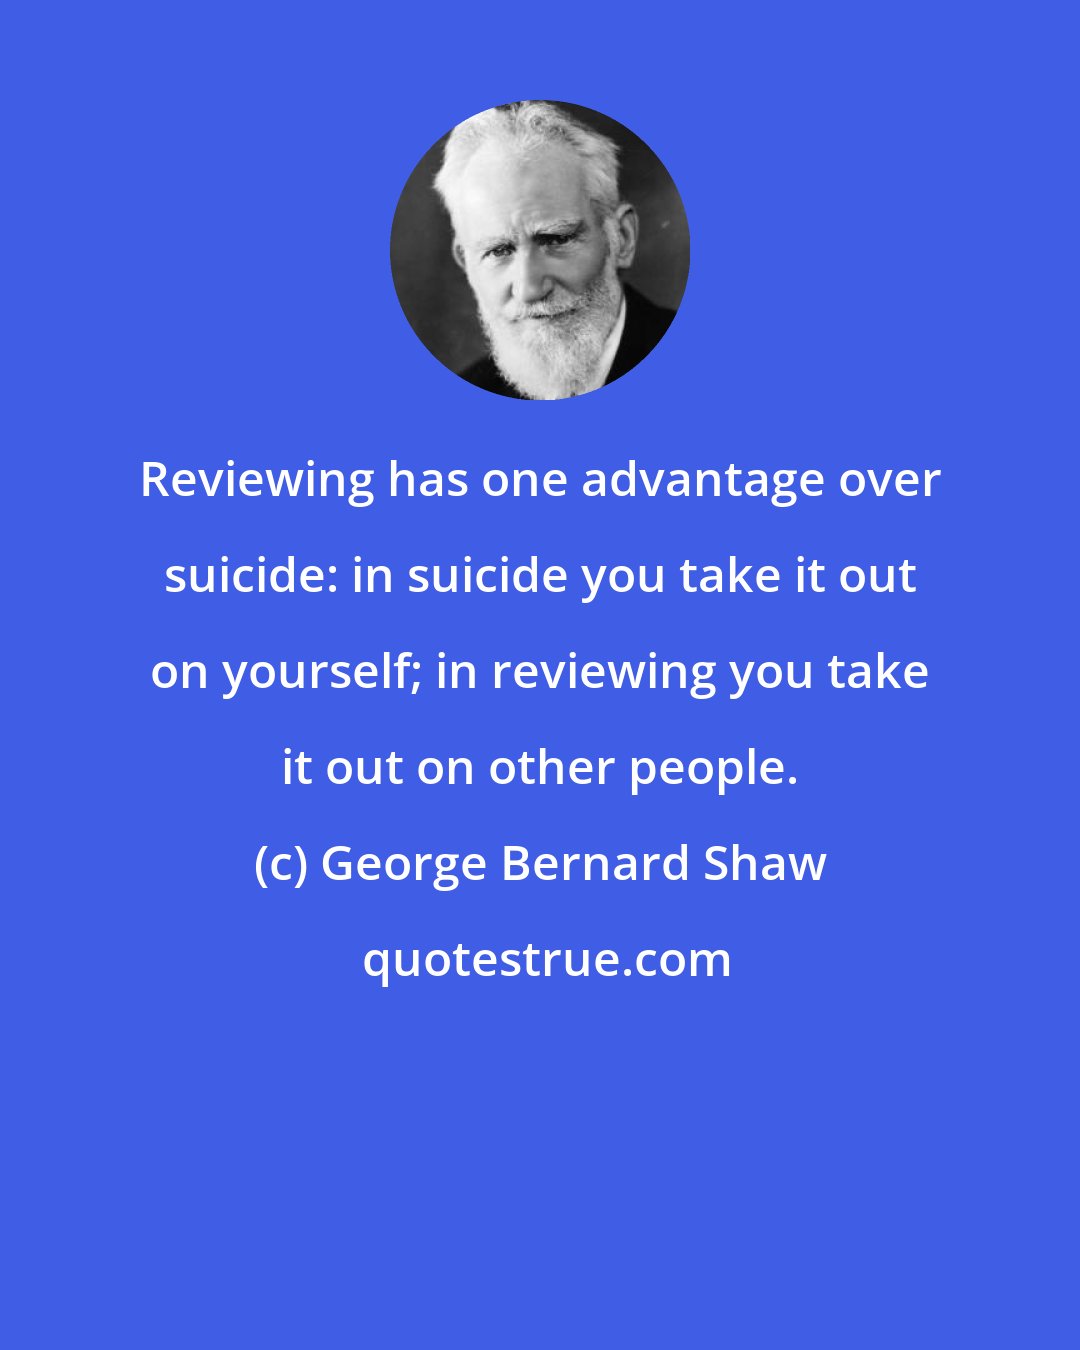 George Bernard Shaw: Reviewing has one advantage over suicide: in suicide you take it out on yourself; in reviewing you take it out on other people.